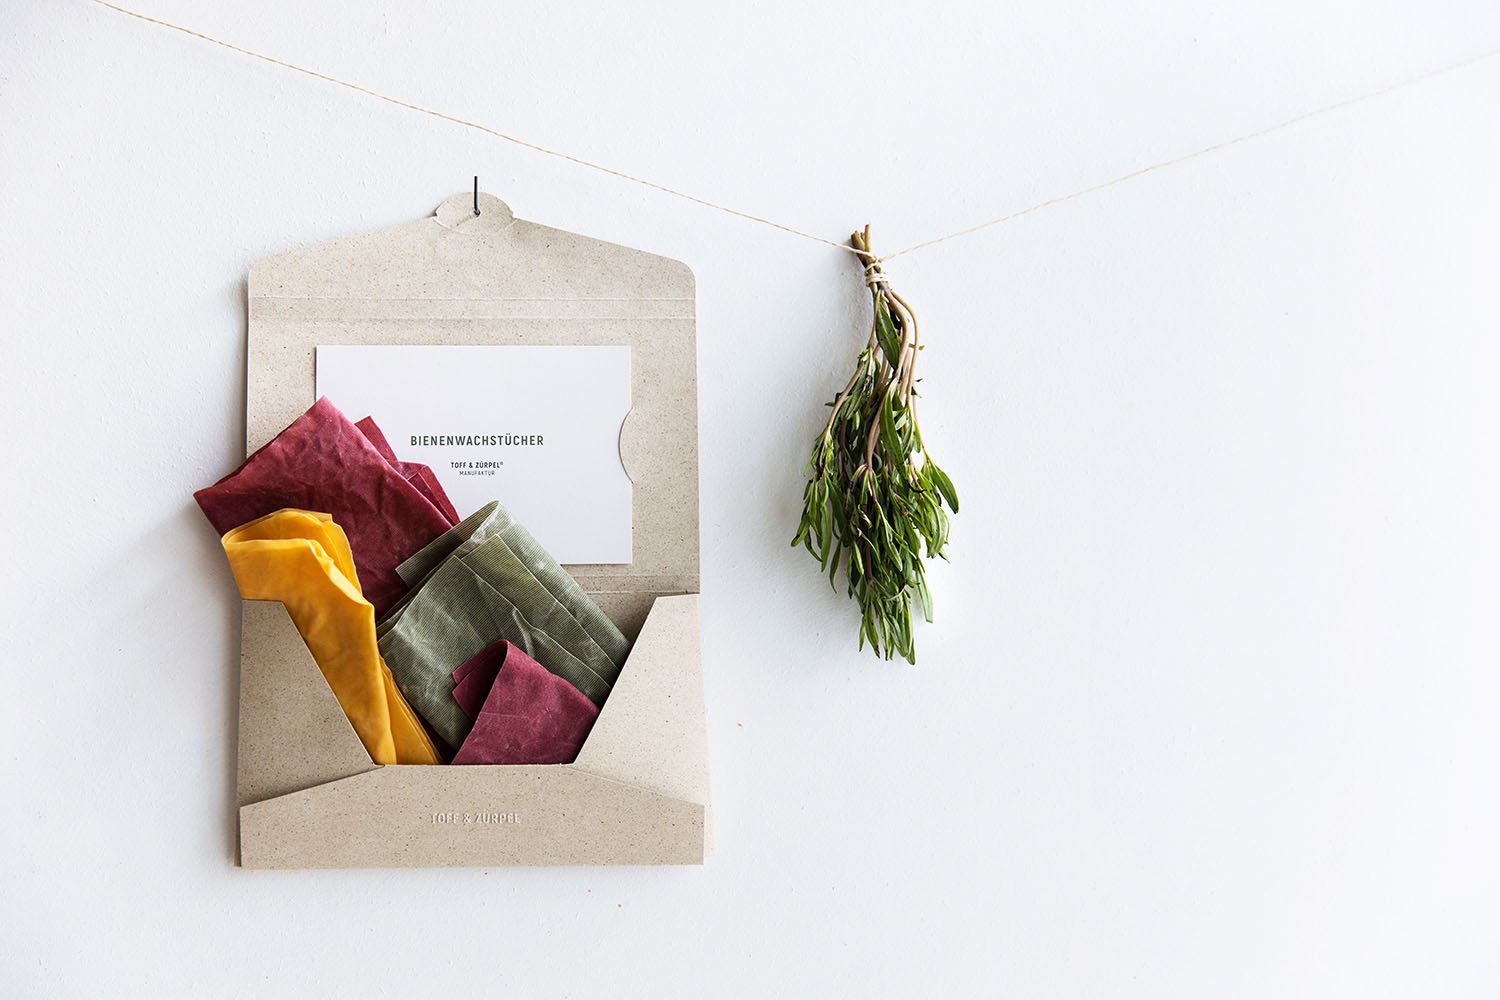 Our reusable grass paper packaging is hung open and filled with beeswax wraps in the colors green, red and yellow, with a bundle of herbs hanging next to it.